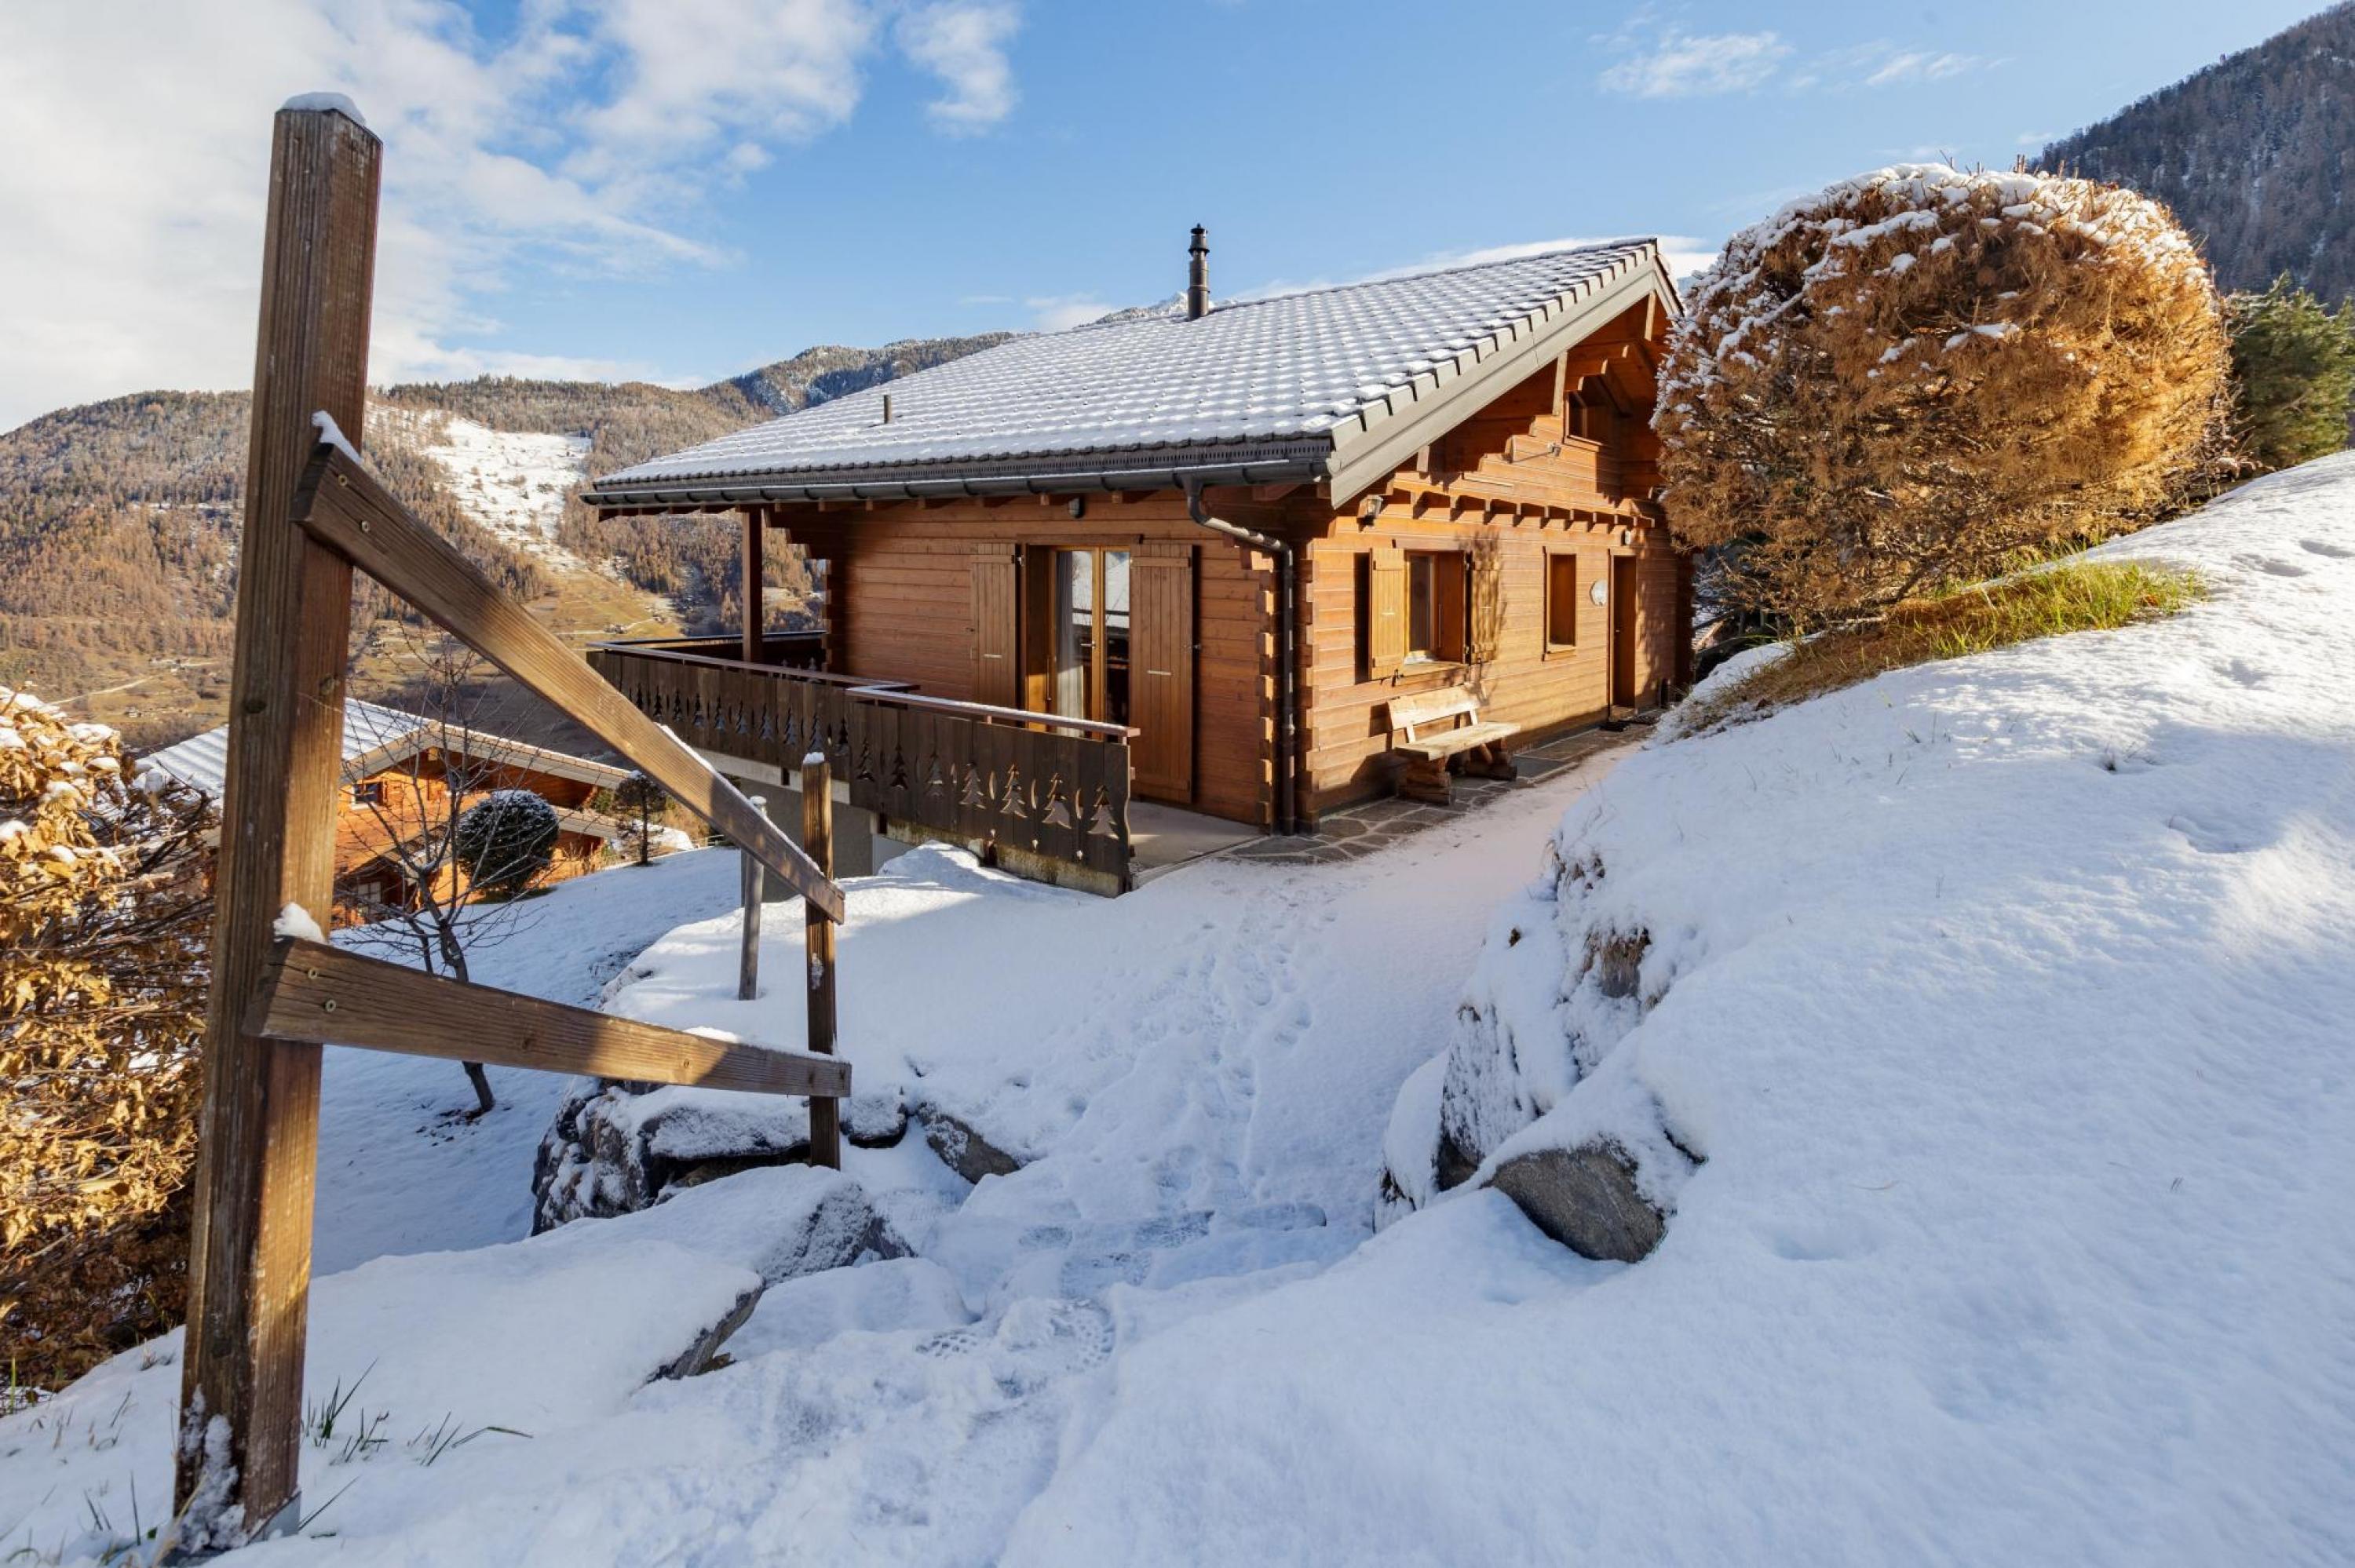 Property Image 1 - Chalet Elbaz - Swiss Chalet with breathtaking views